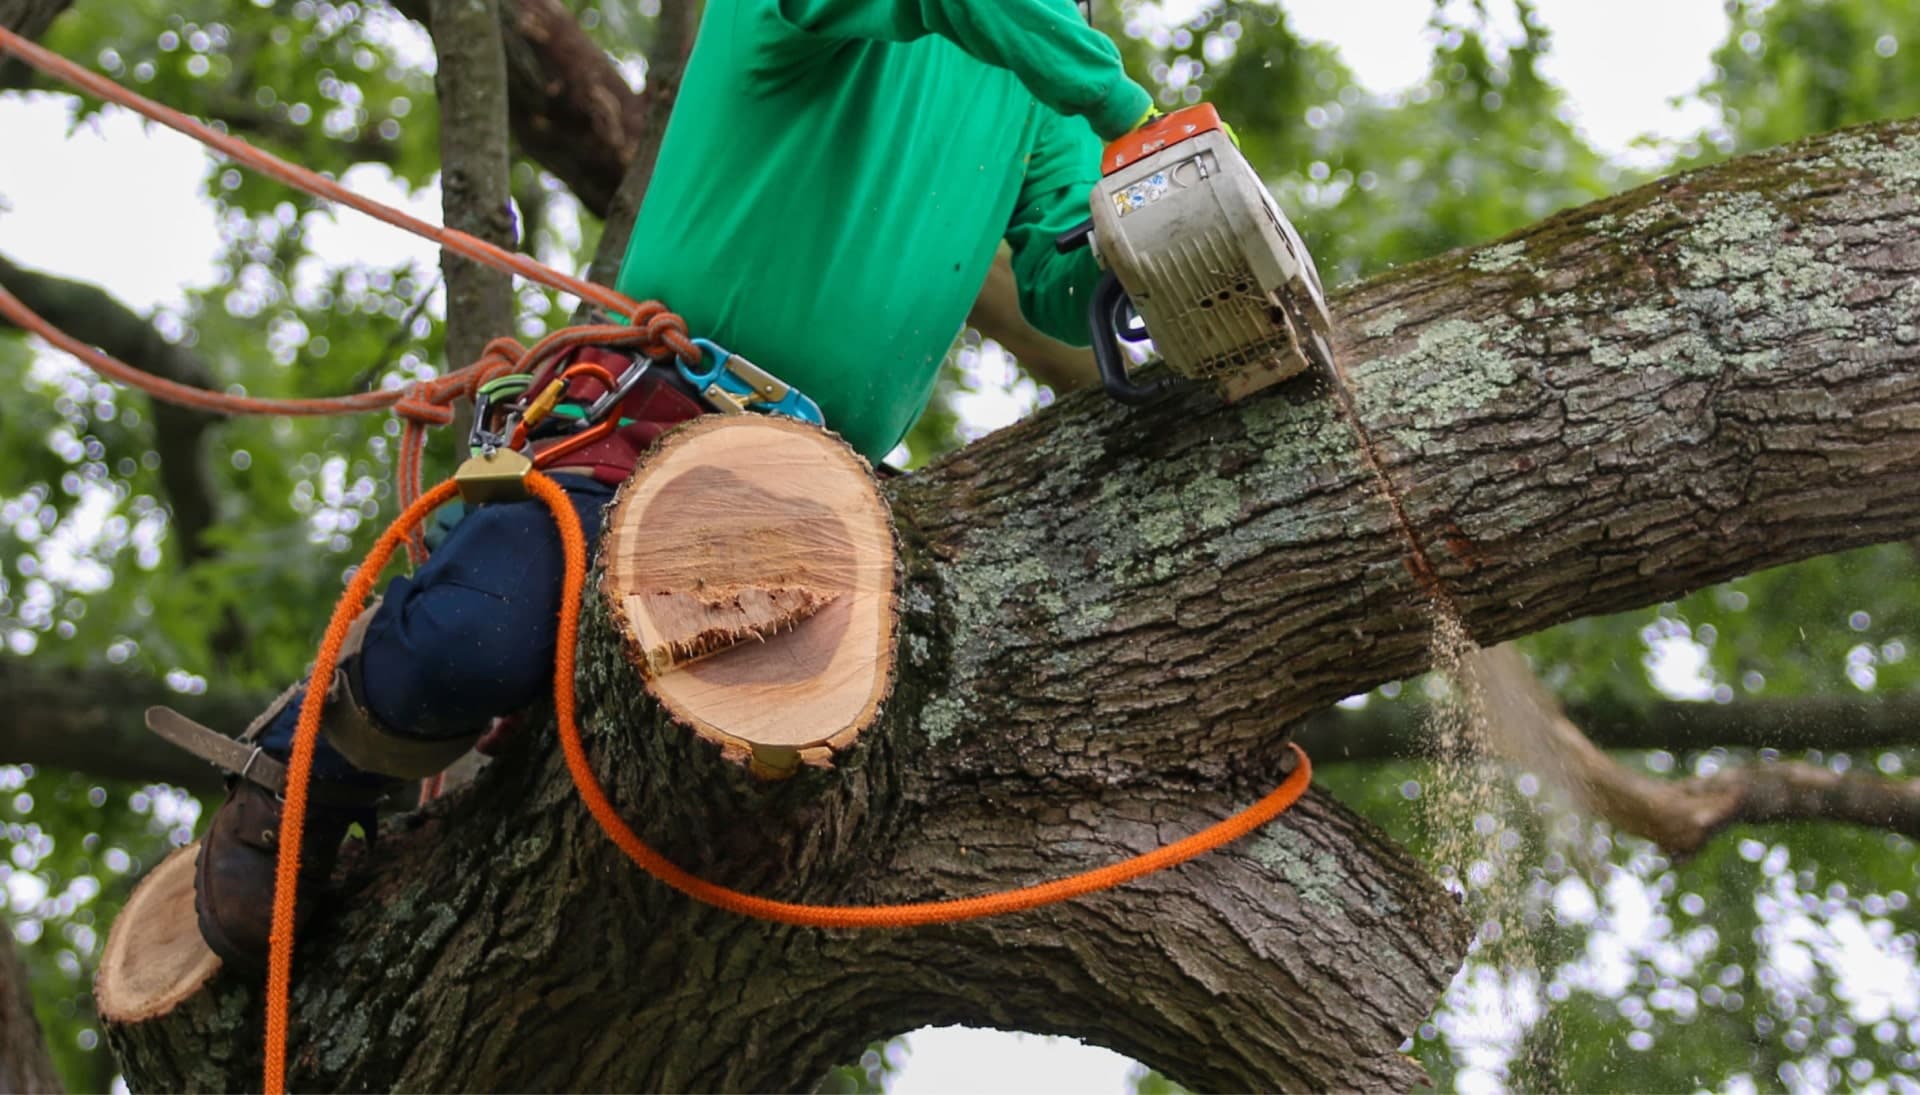 Shed your worries away with best tree removal in Princeton